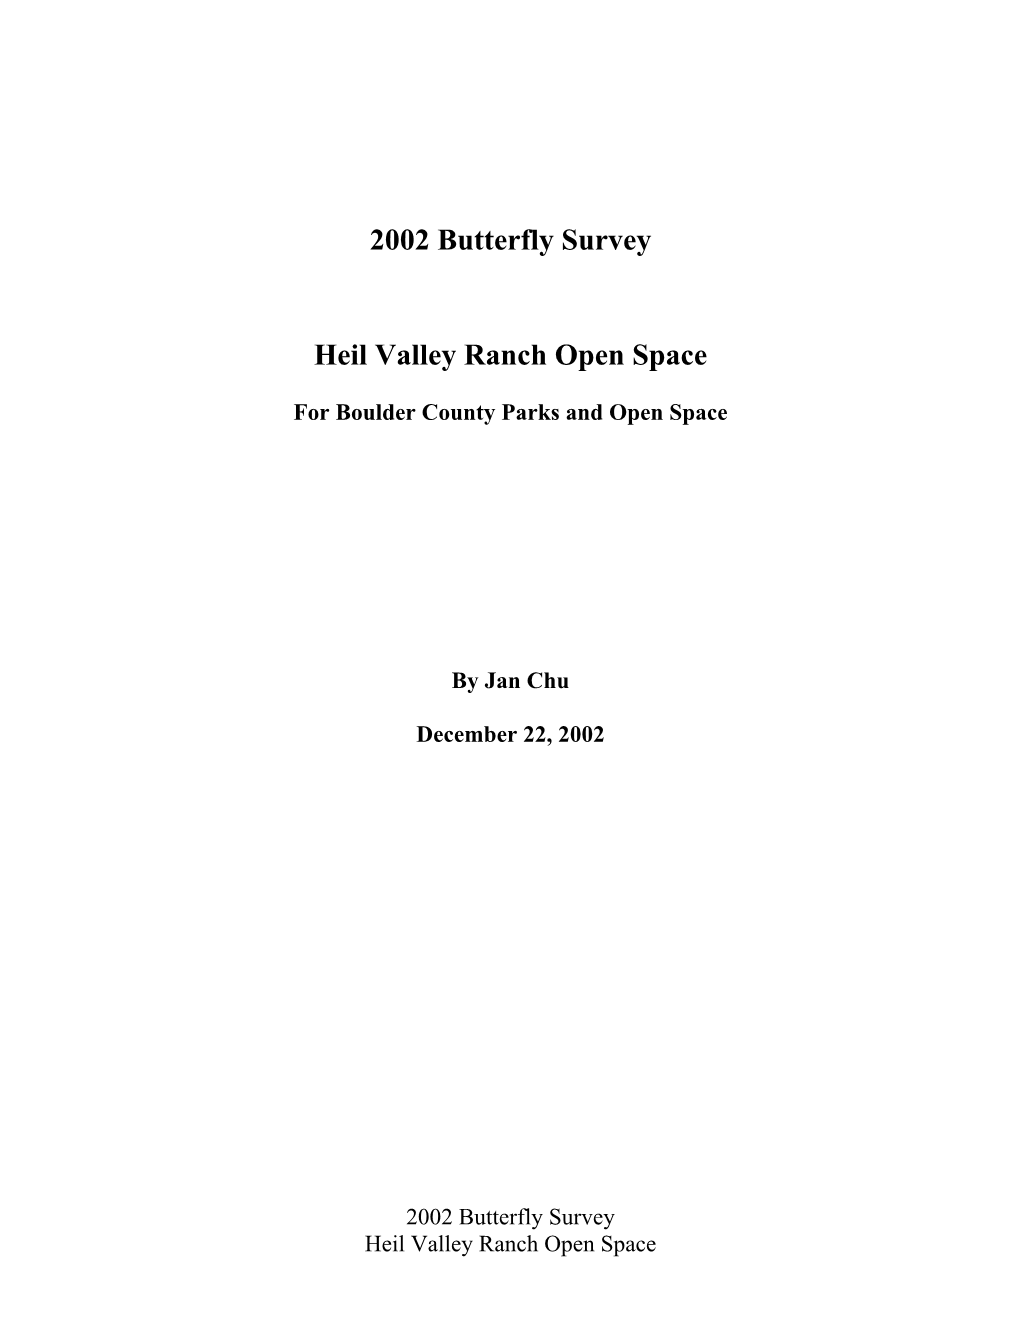 Report on the 2002 Butterfly Survey